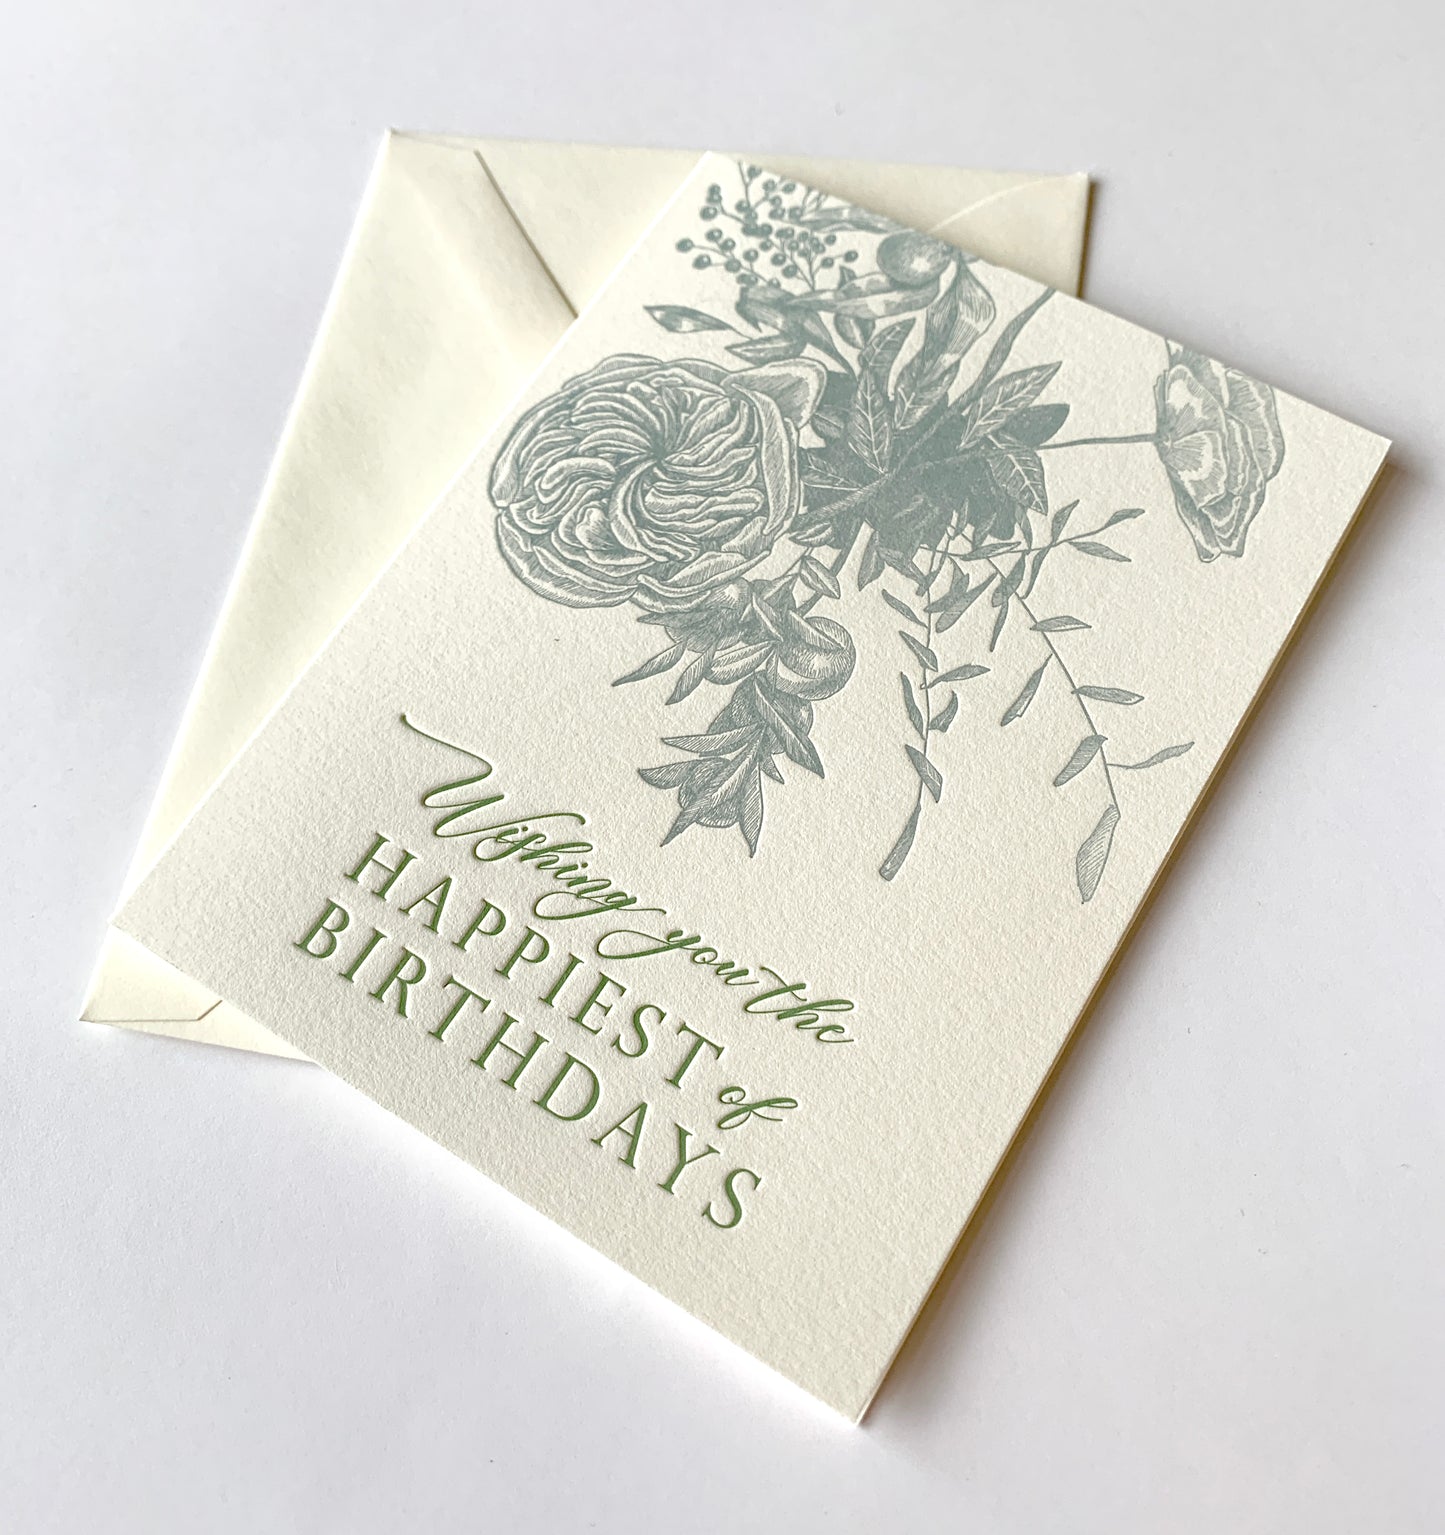 Wishing You the Happiest of Birthdays Letterpress Greeting Card